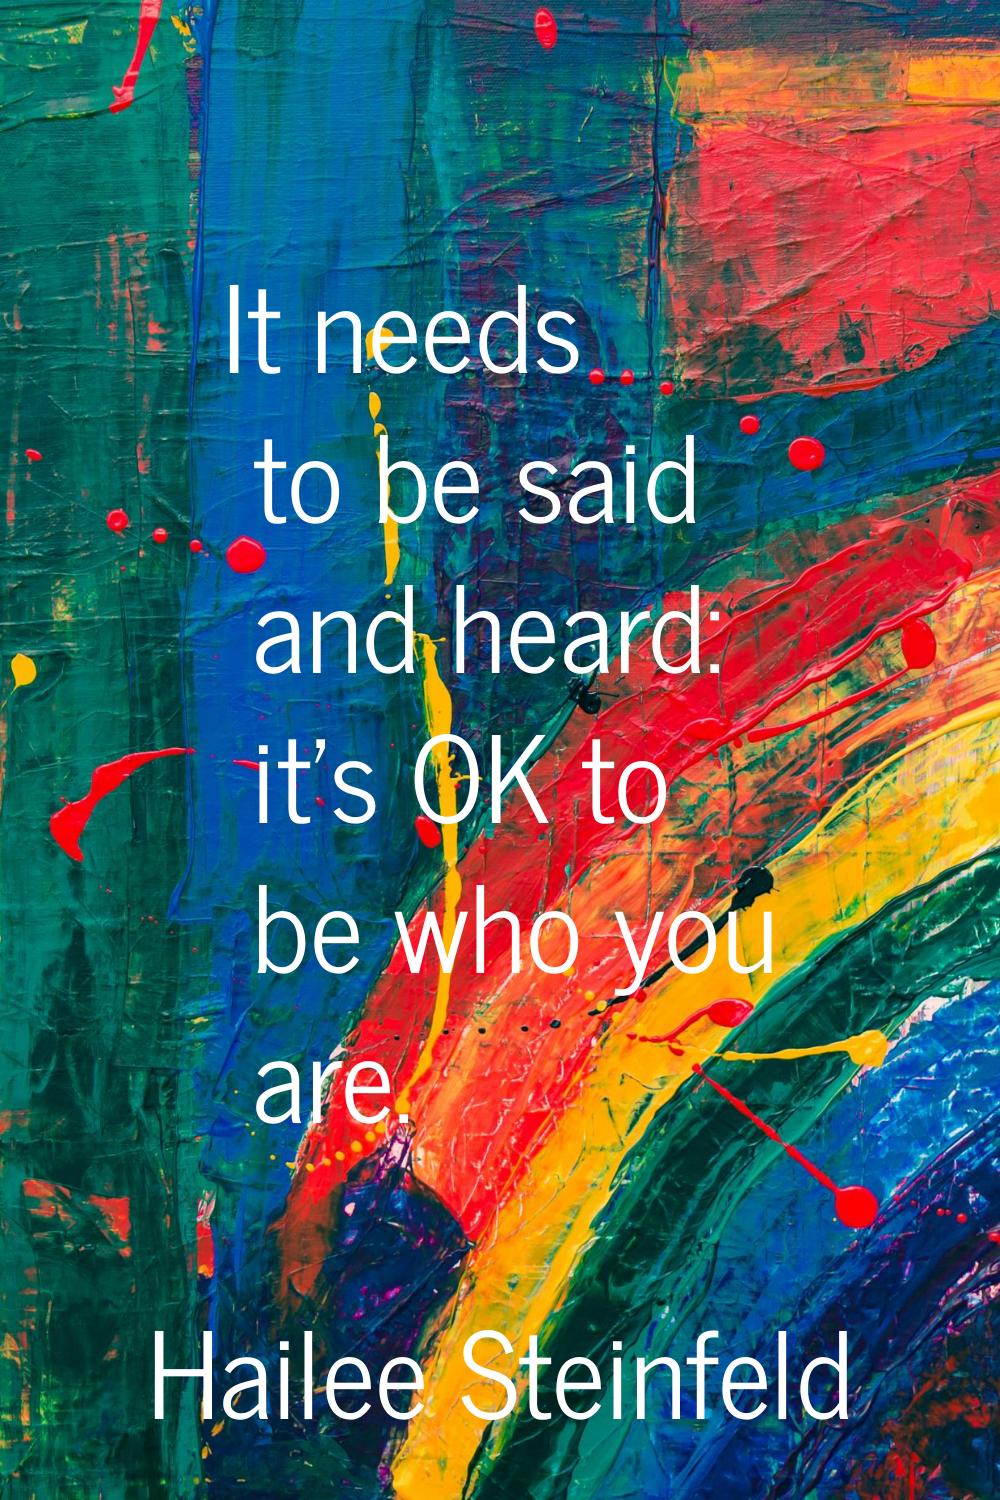 It needs to be said and heard: it's OK to be who you are.